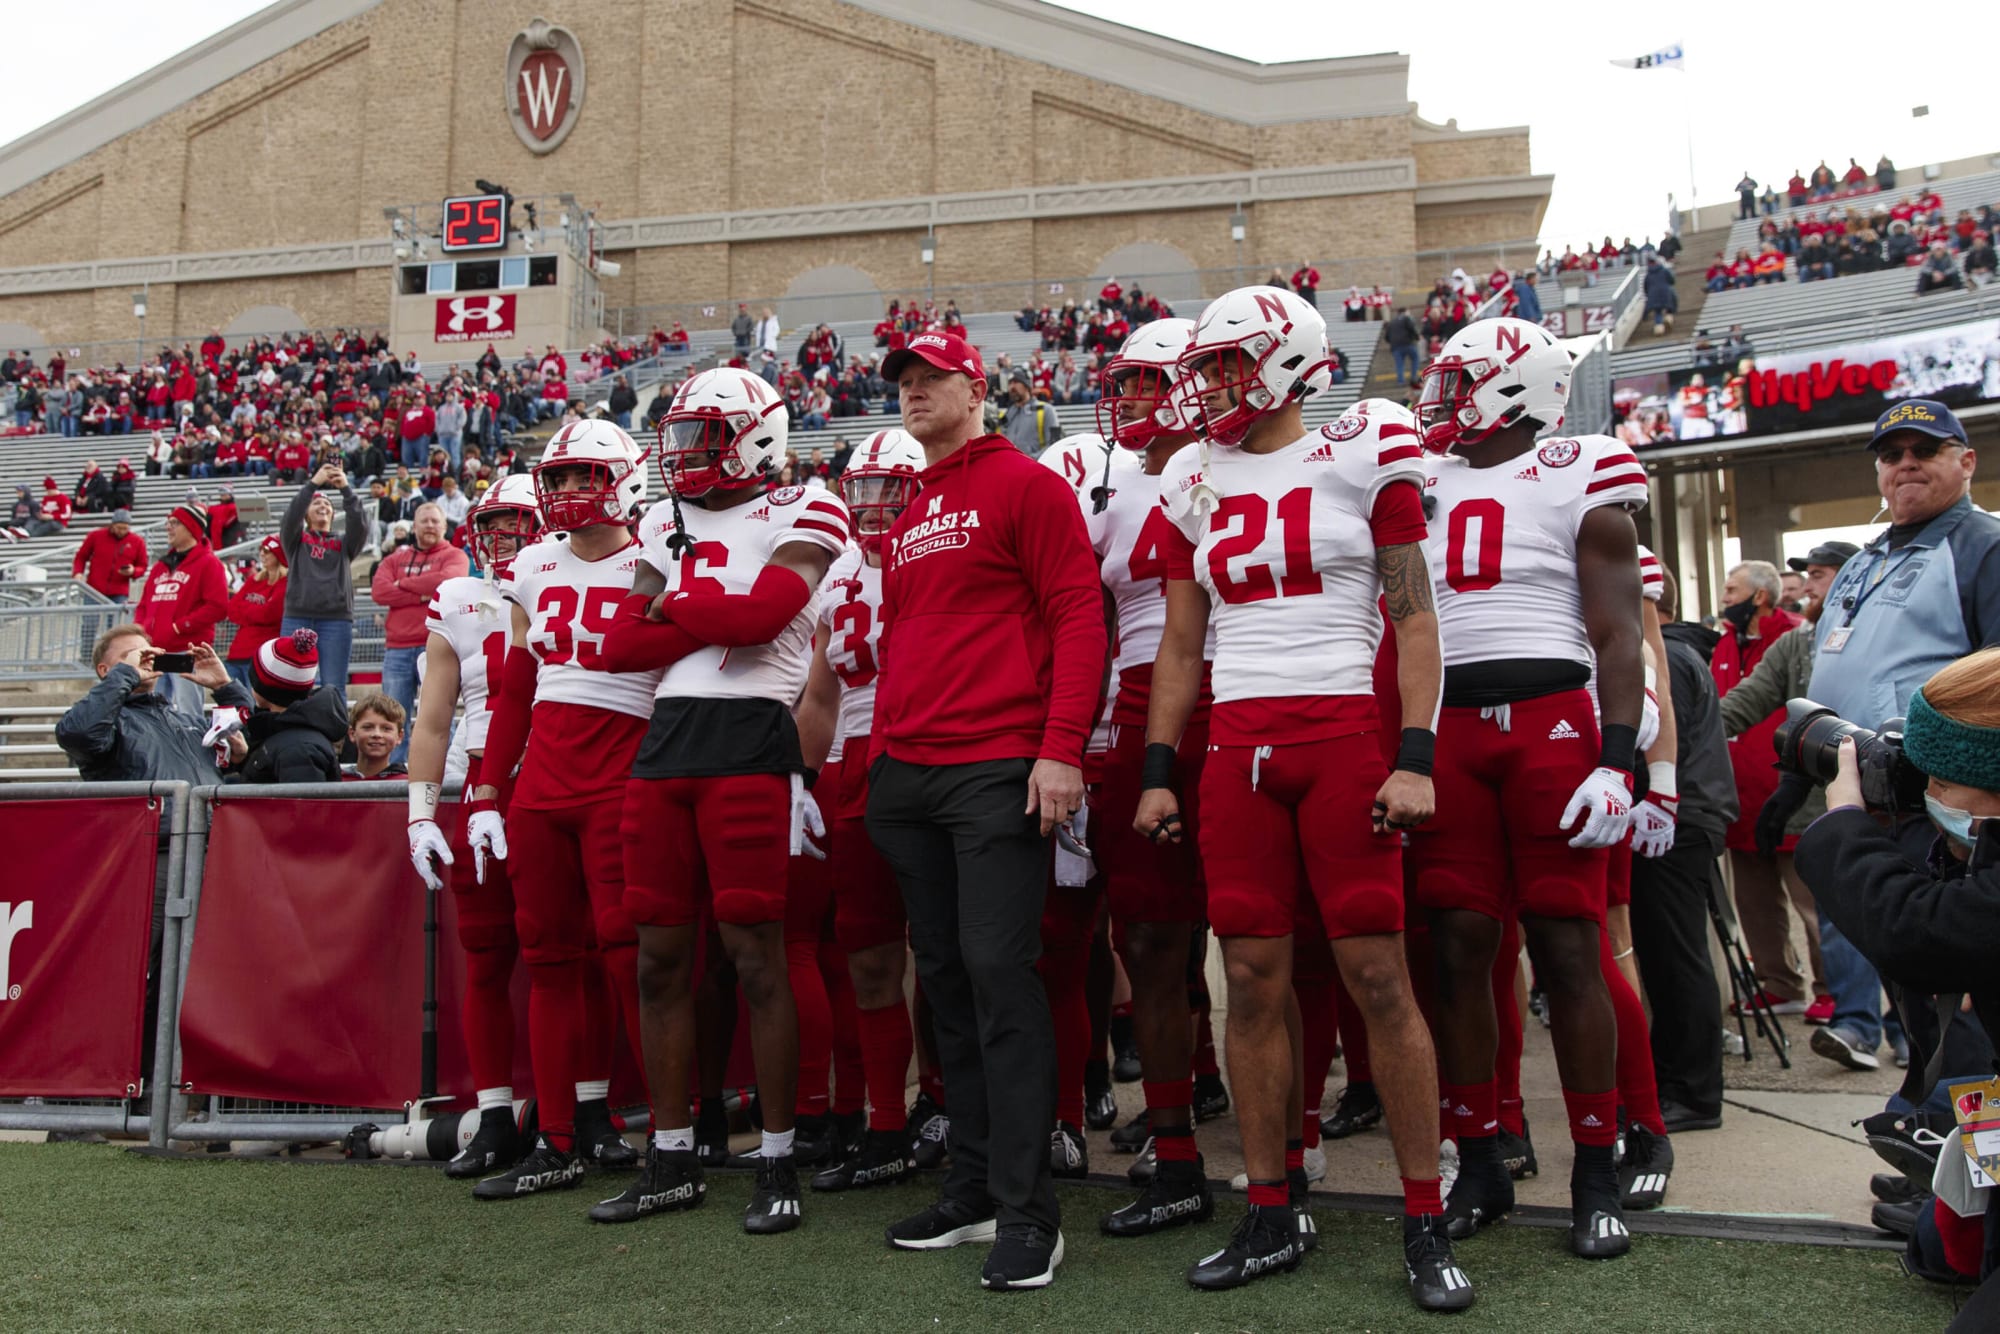 Huskers 2022 Football Schedule 2022 Nebraska Football Schedule And Way-Too-Early Predictions